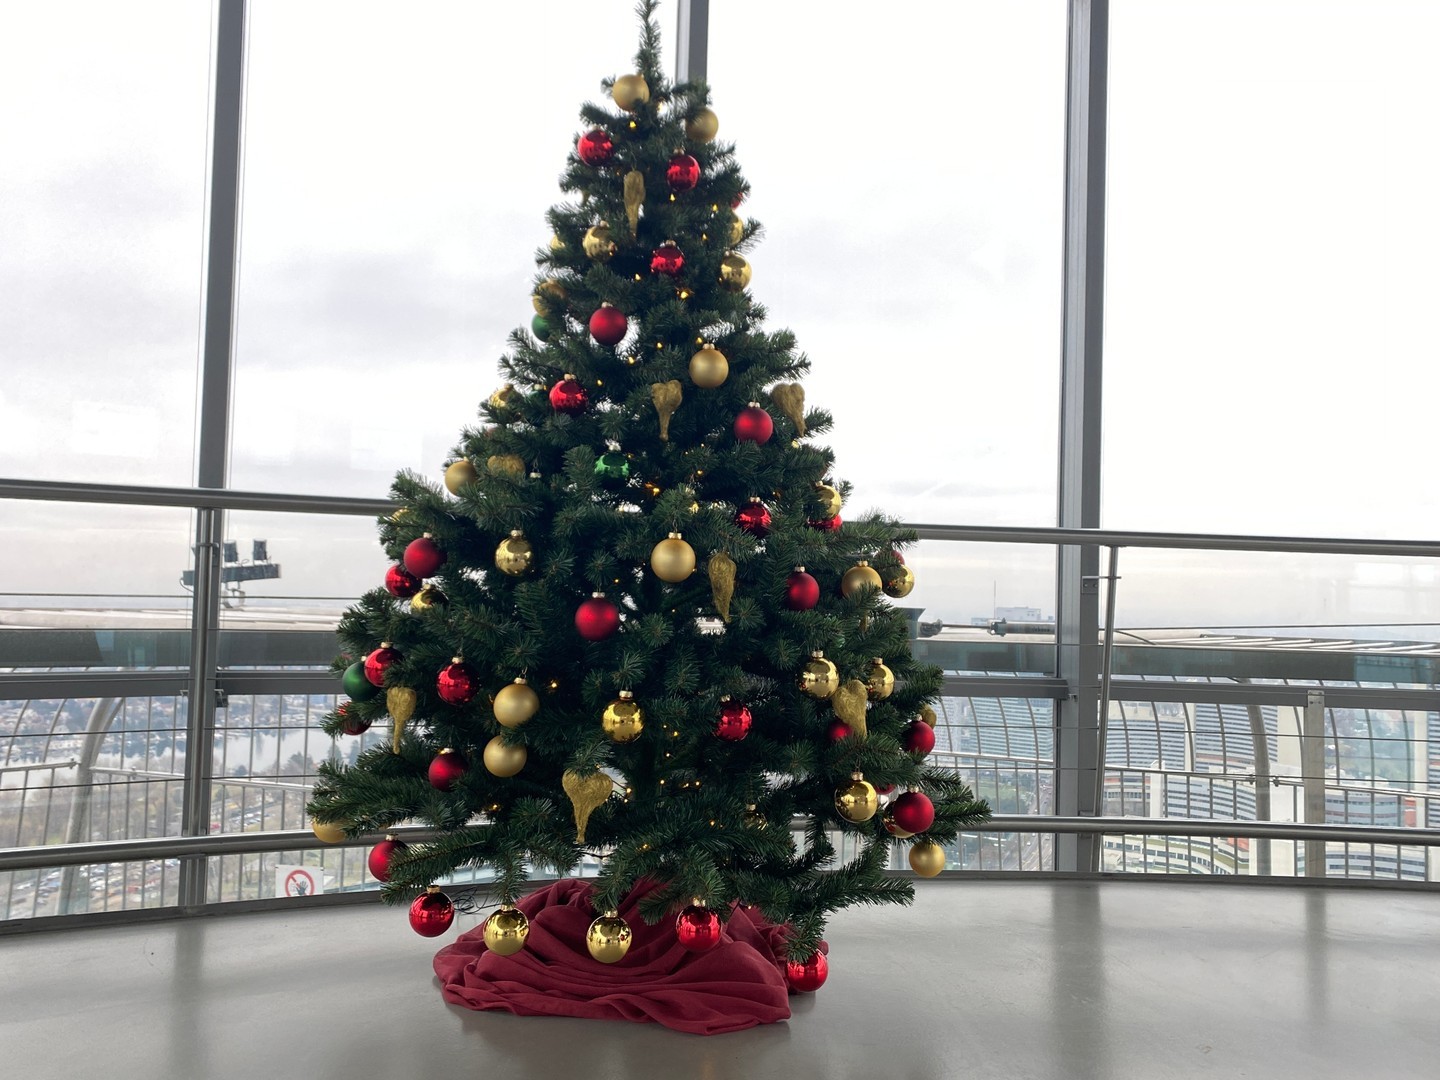 🎄 To all our guests and friends we sincerely wish a Merry Christmas, a few days to rest and enjoy the company of loved ones.<br />
<br />
#donauturm #wien #wienliebe #christmastime #christmas #weihnachtsbaum #weihnachtsbaumliebe #xmastree #xmas #christmasinvienna